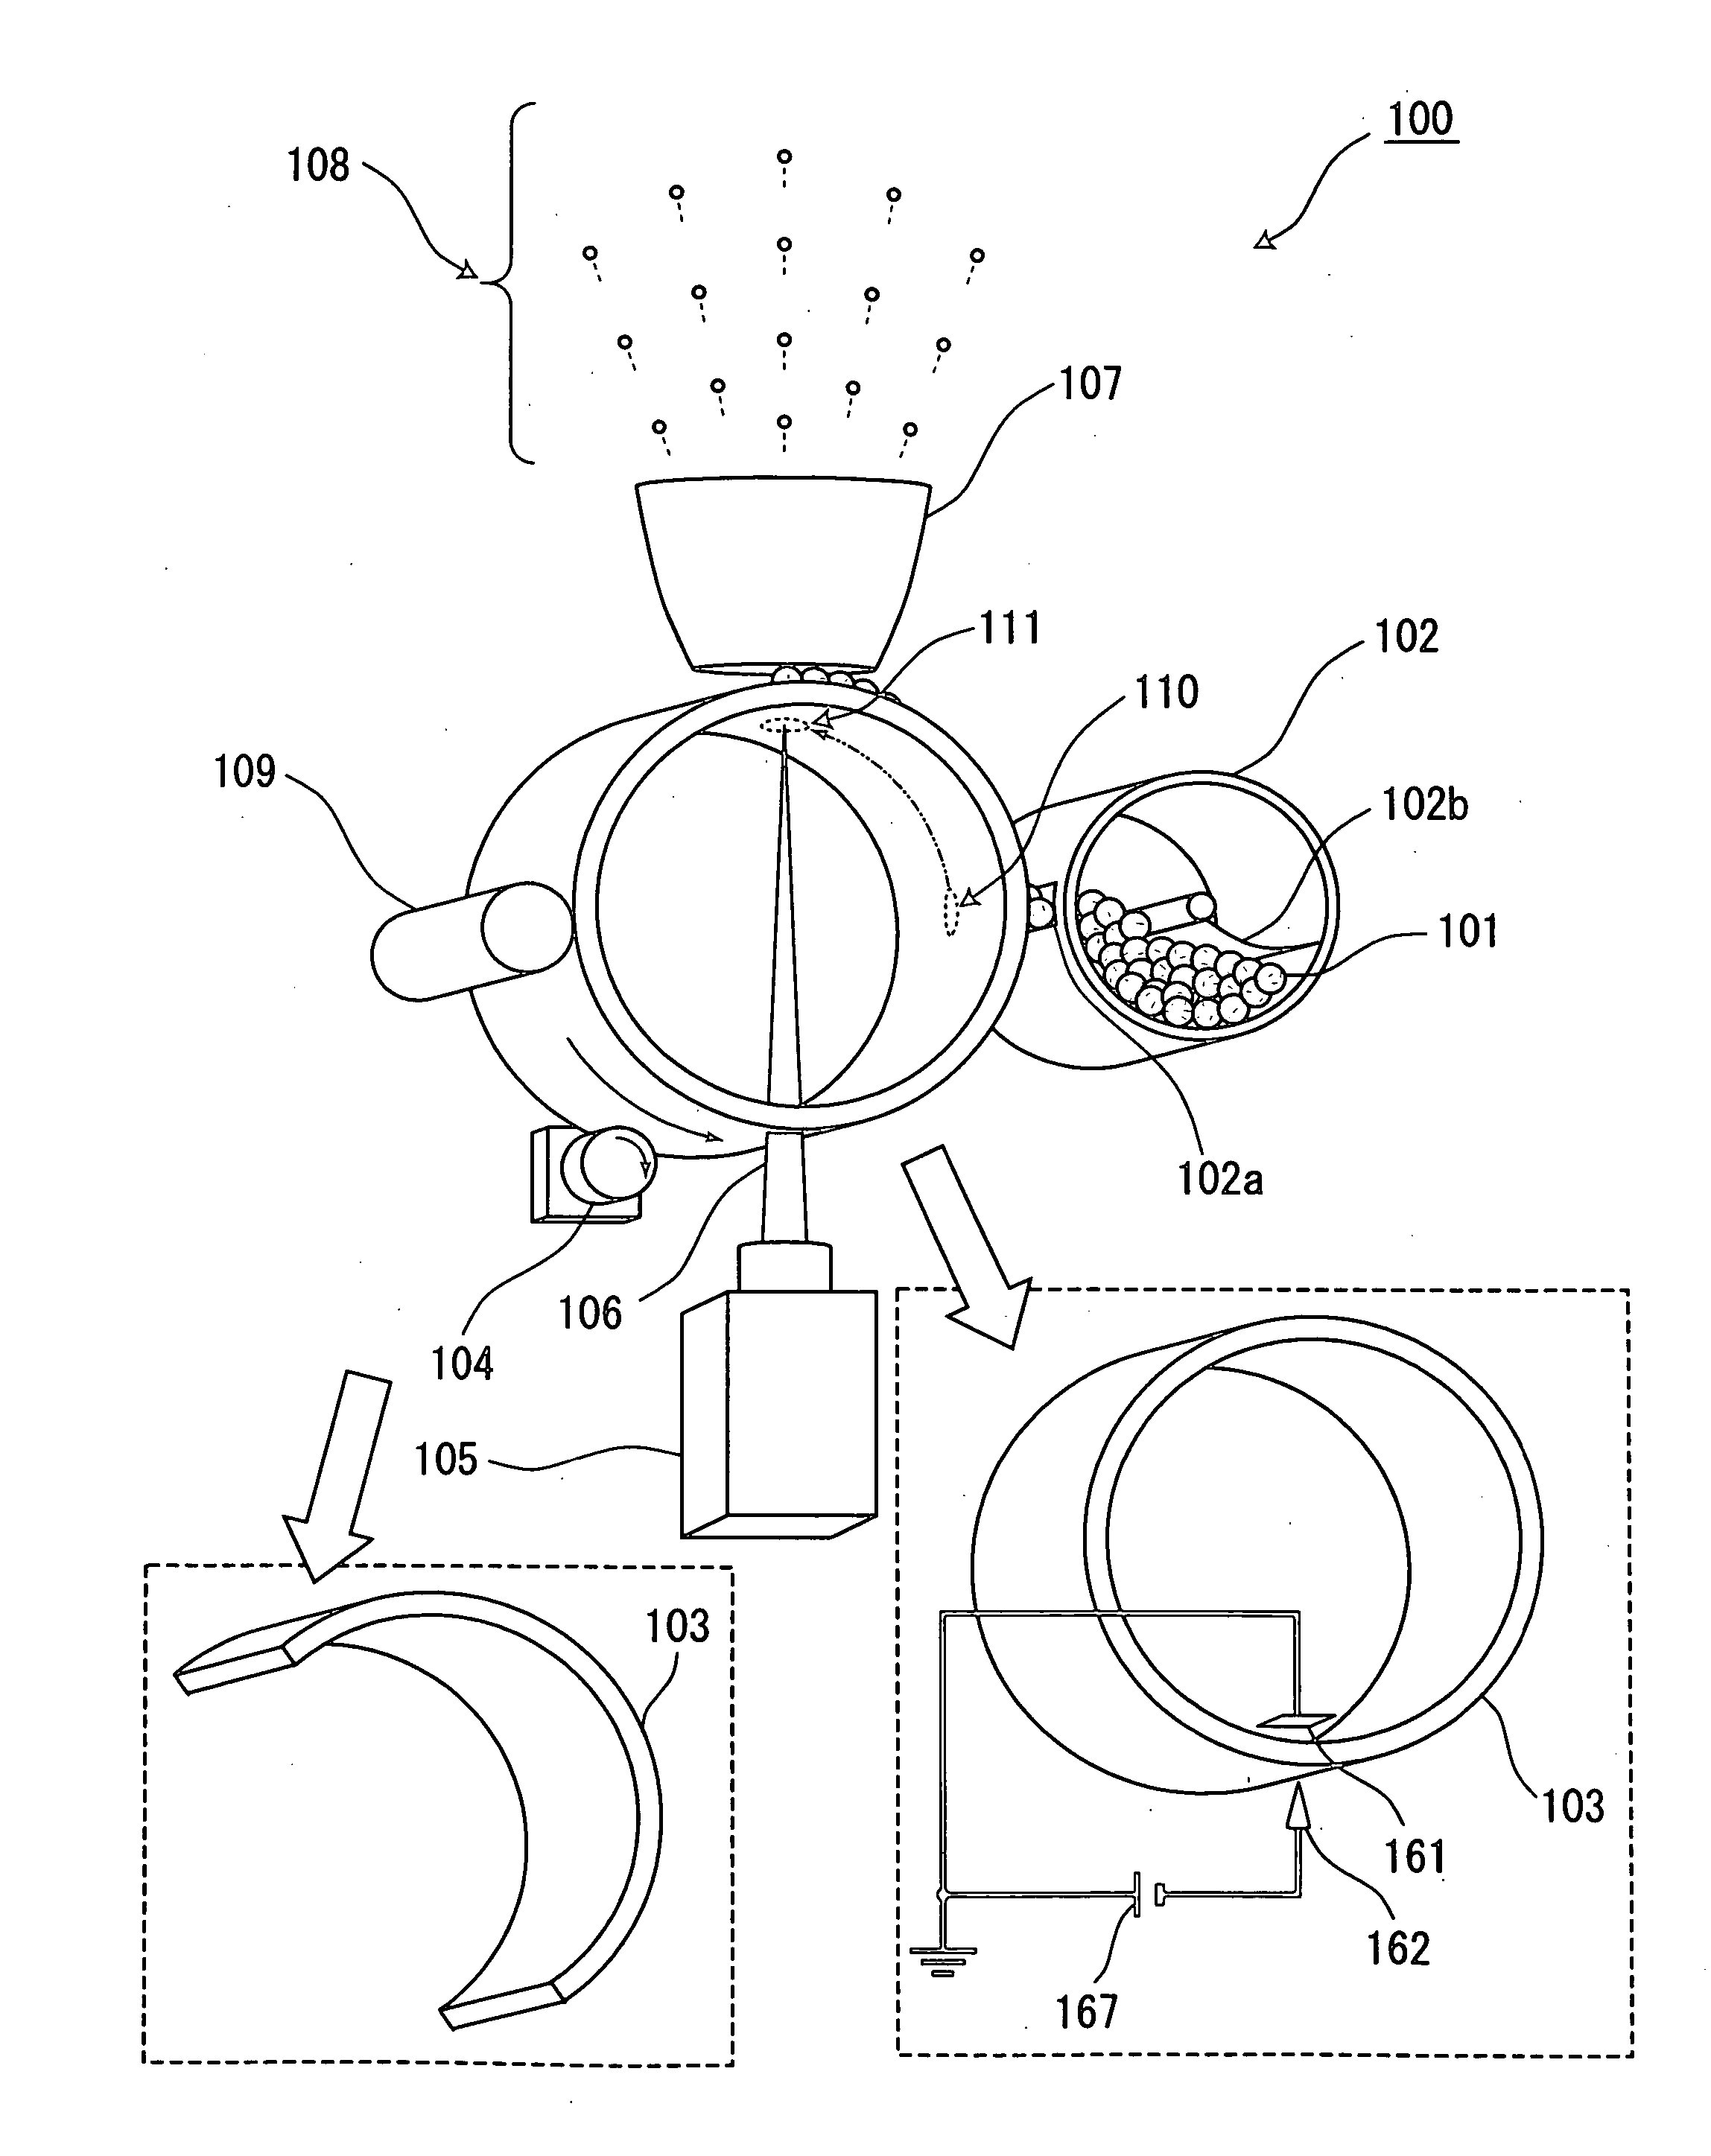 Powder propellant-based space propulsion device